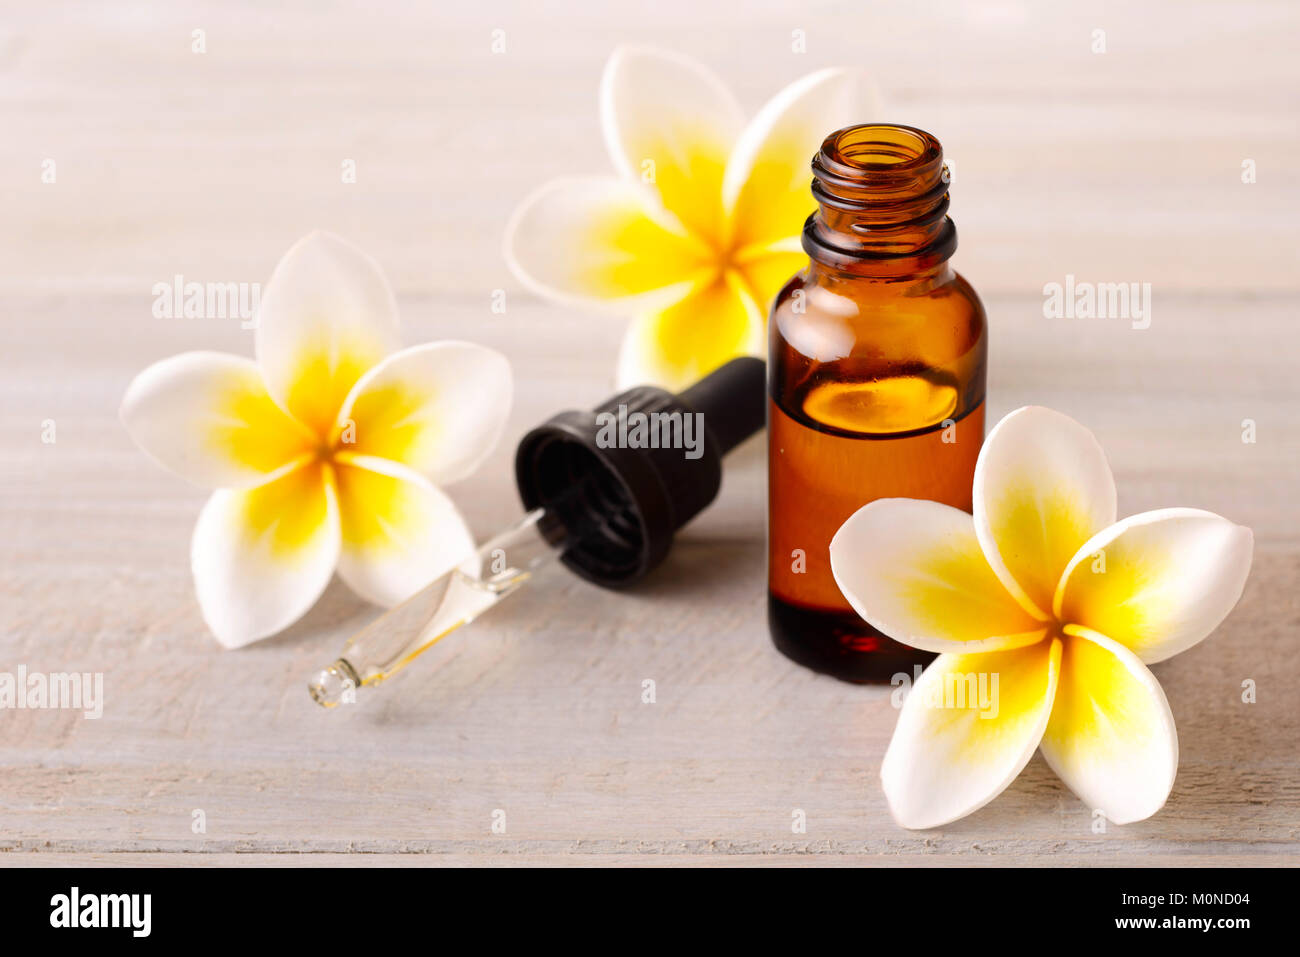 plumeria flowers and Plumeria Essential Oil Perfume on the wooden table Stock Photo